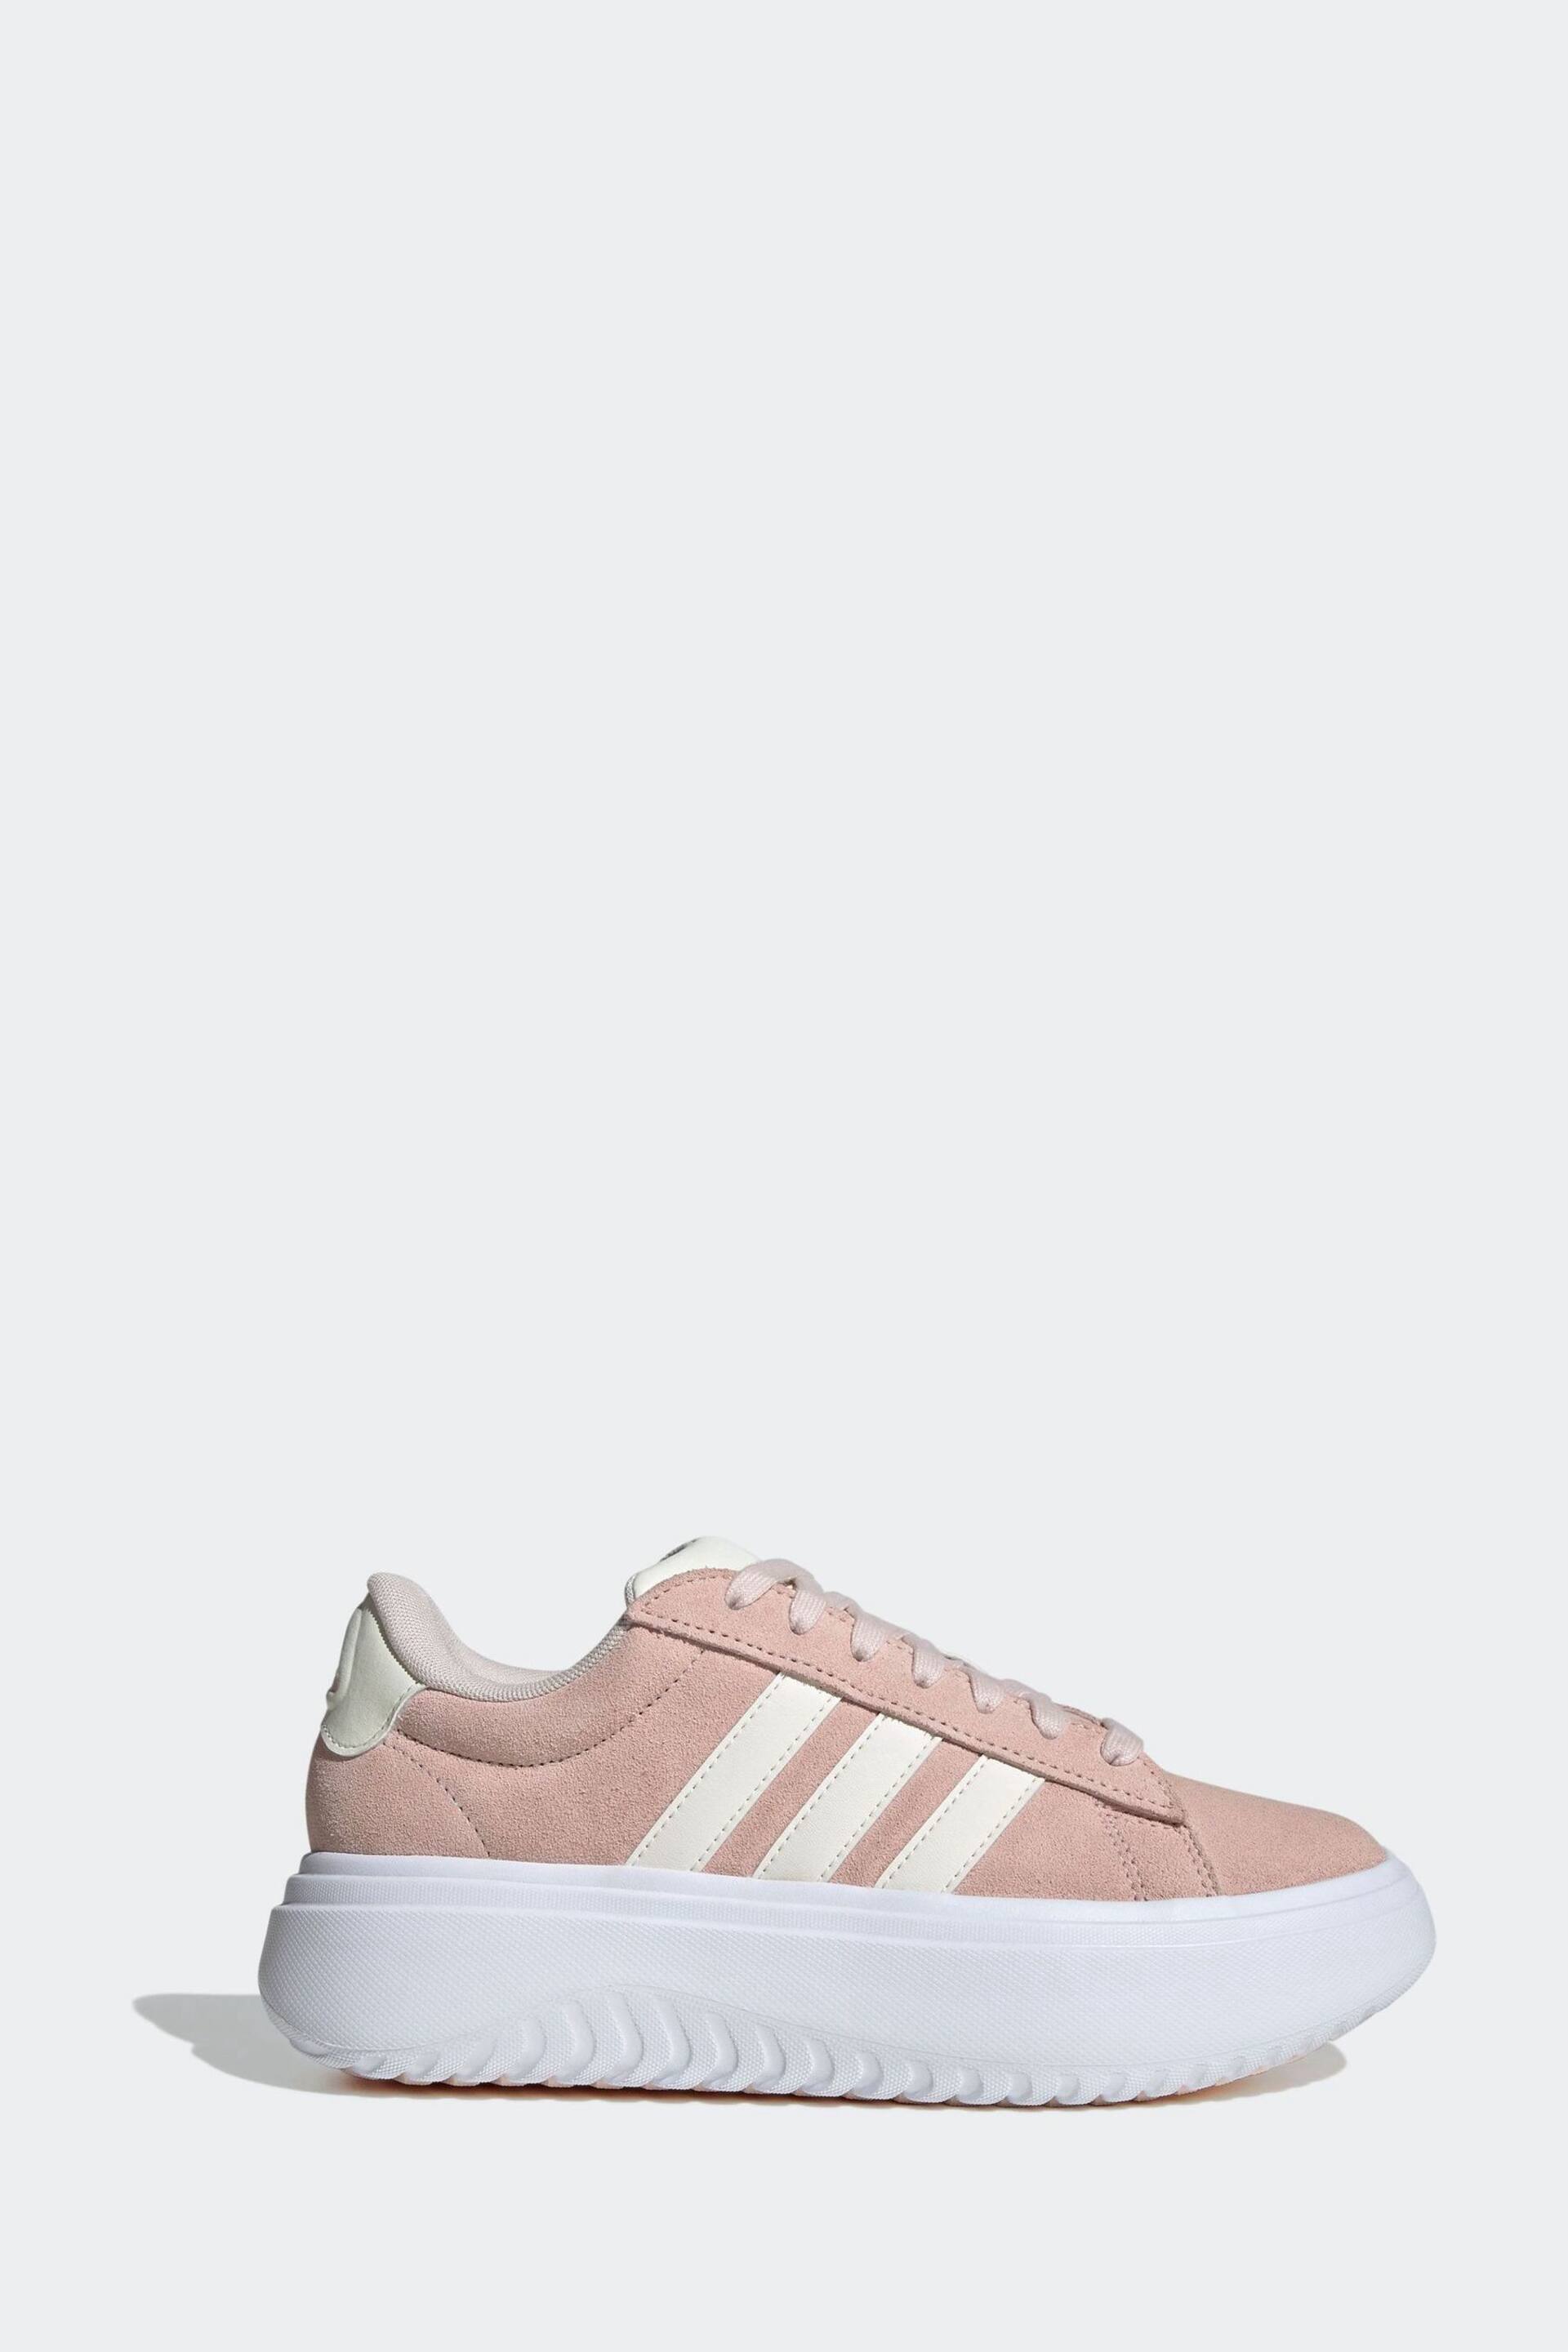 adidas Pink Grand Court Platform Suede Shoes - Image 1 of 8